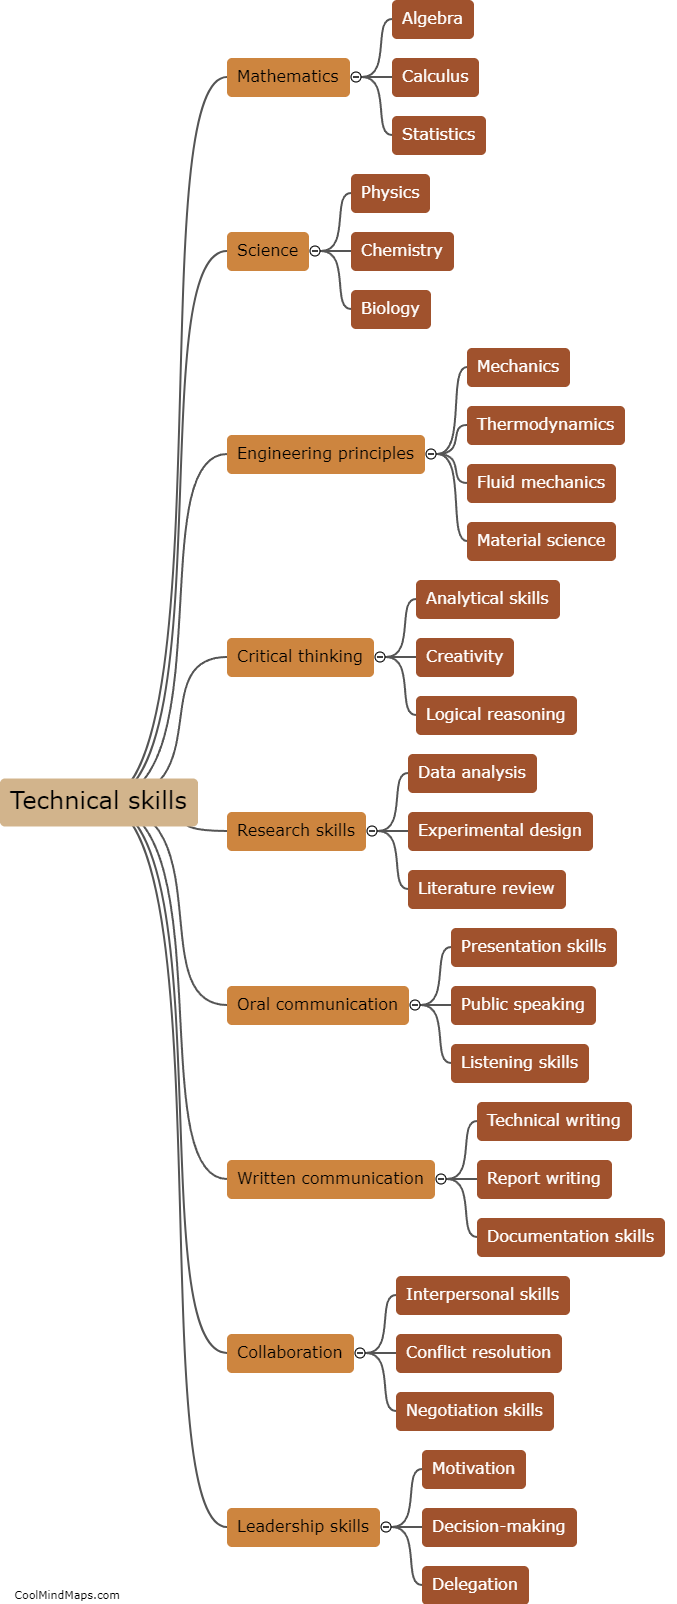 What skills are required in engineering?